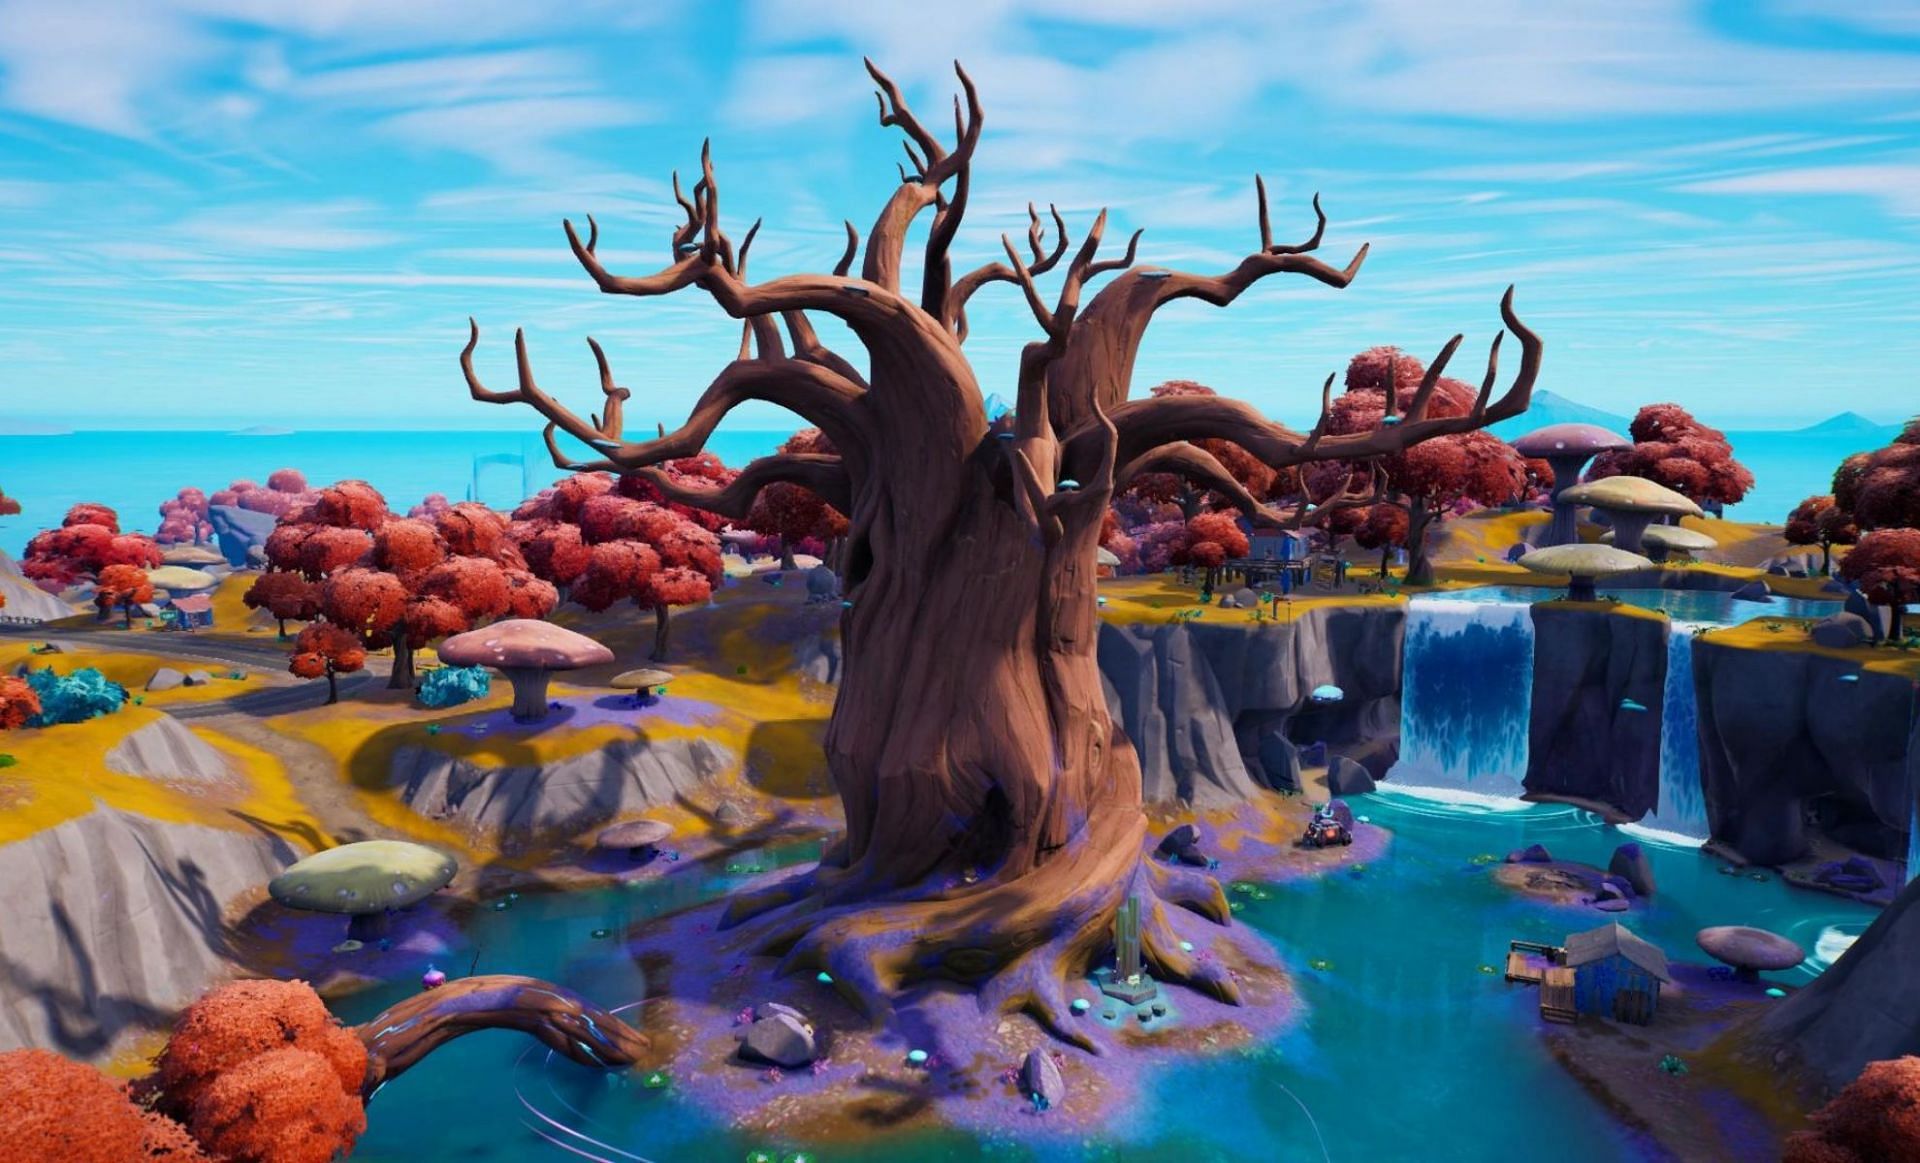 The Reality Tree is dead now (Image via Epic Games)